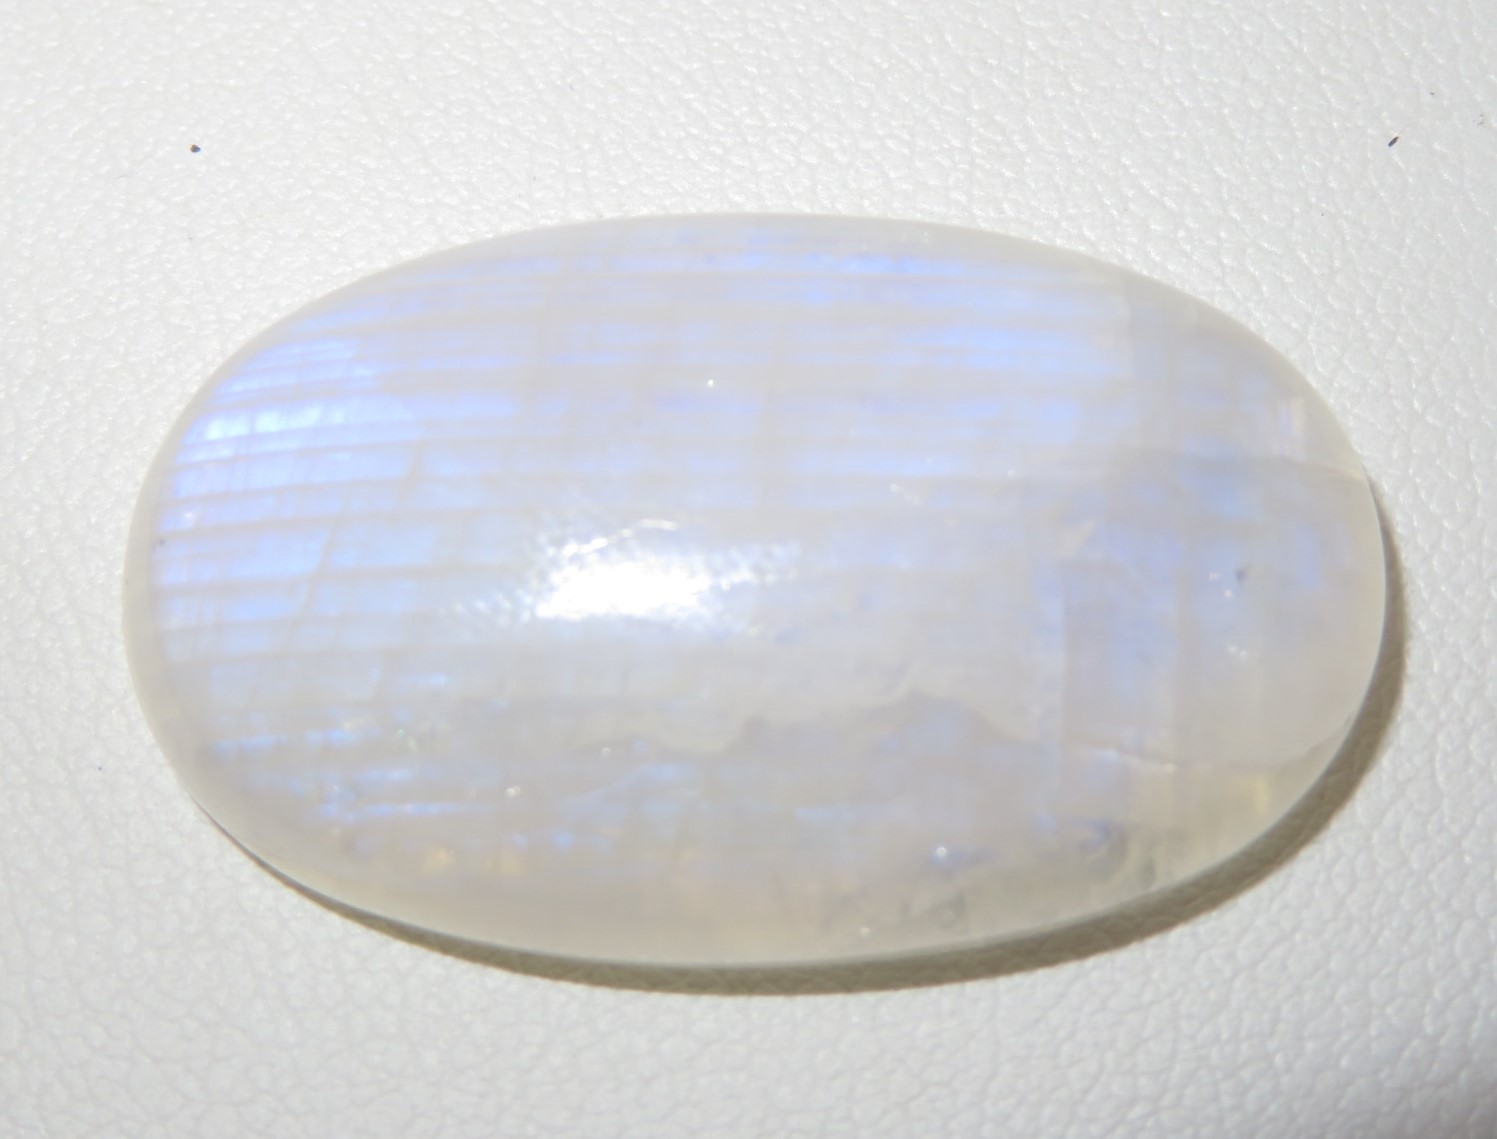 Details about   Rainbow Moonstone Gemstones Lot 10x14 MM SIZE Oval Cabochon Gemstone DR04 